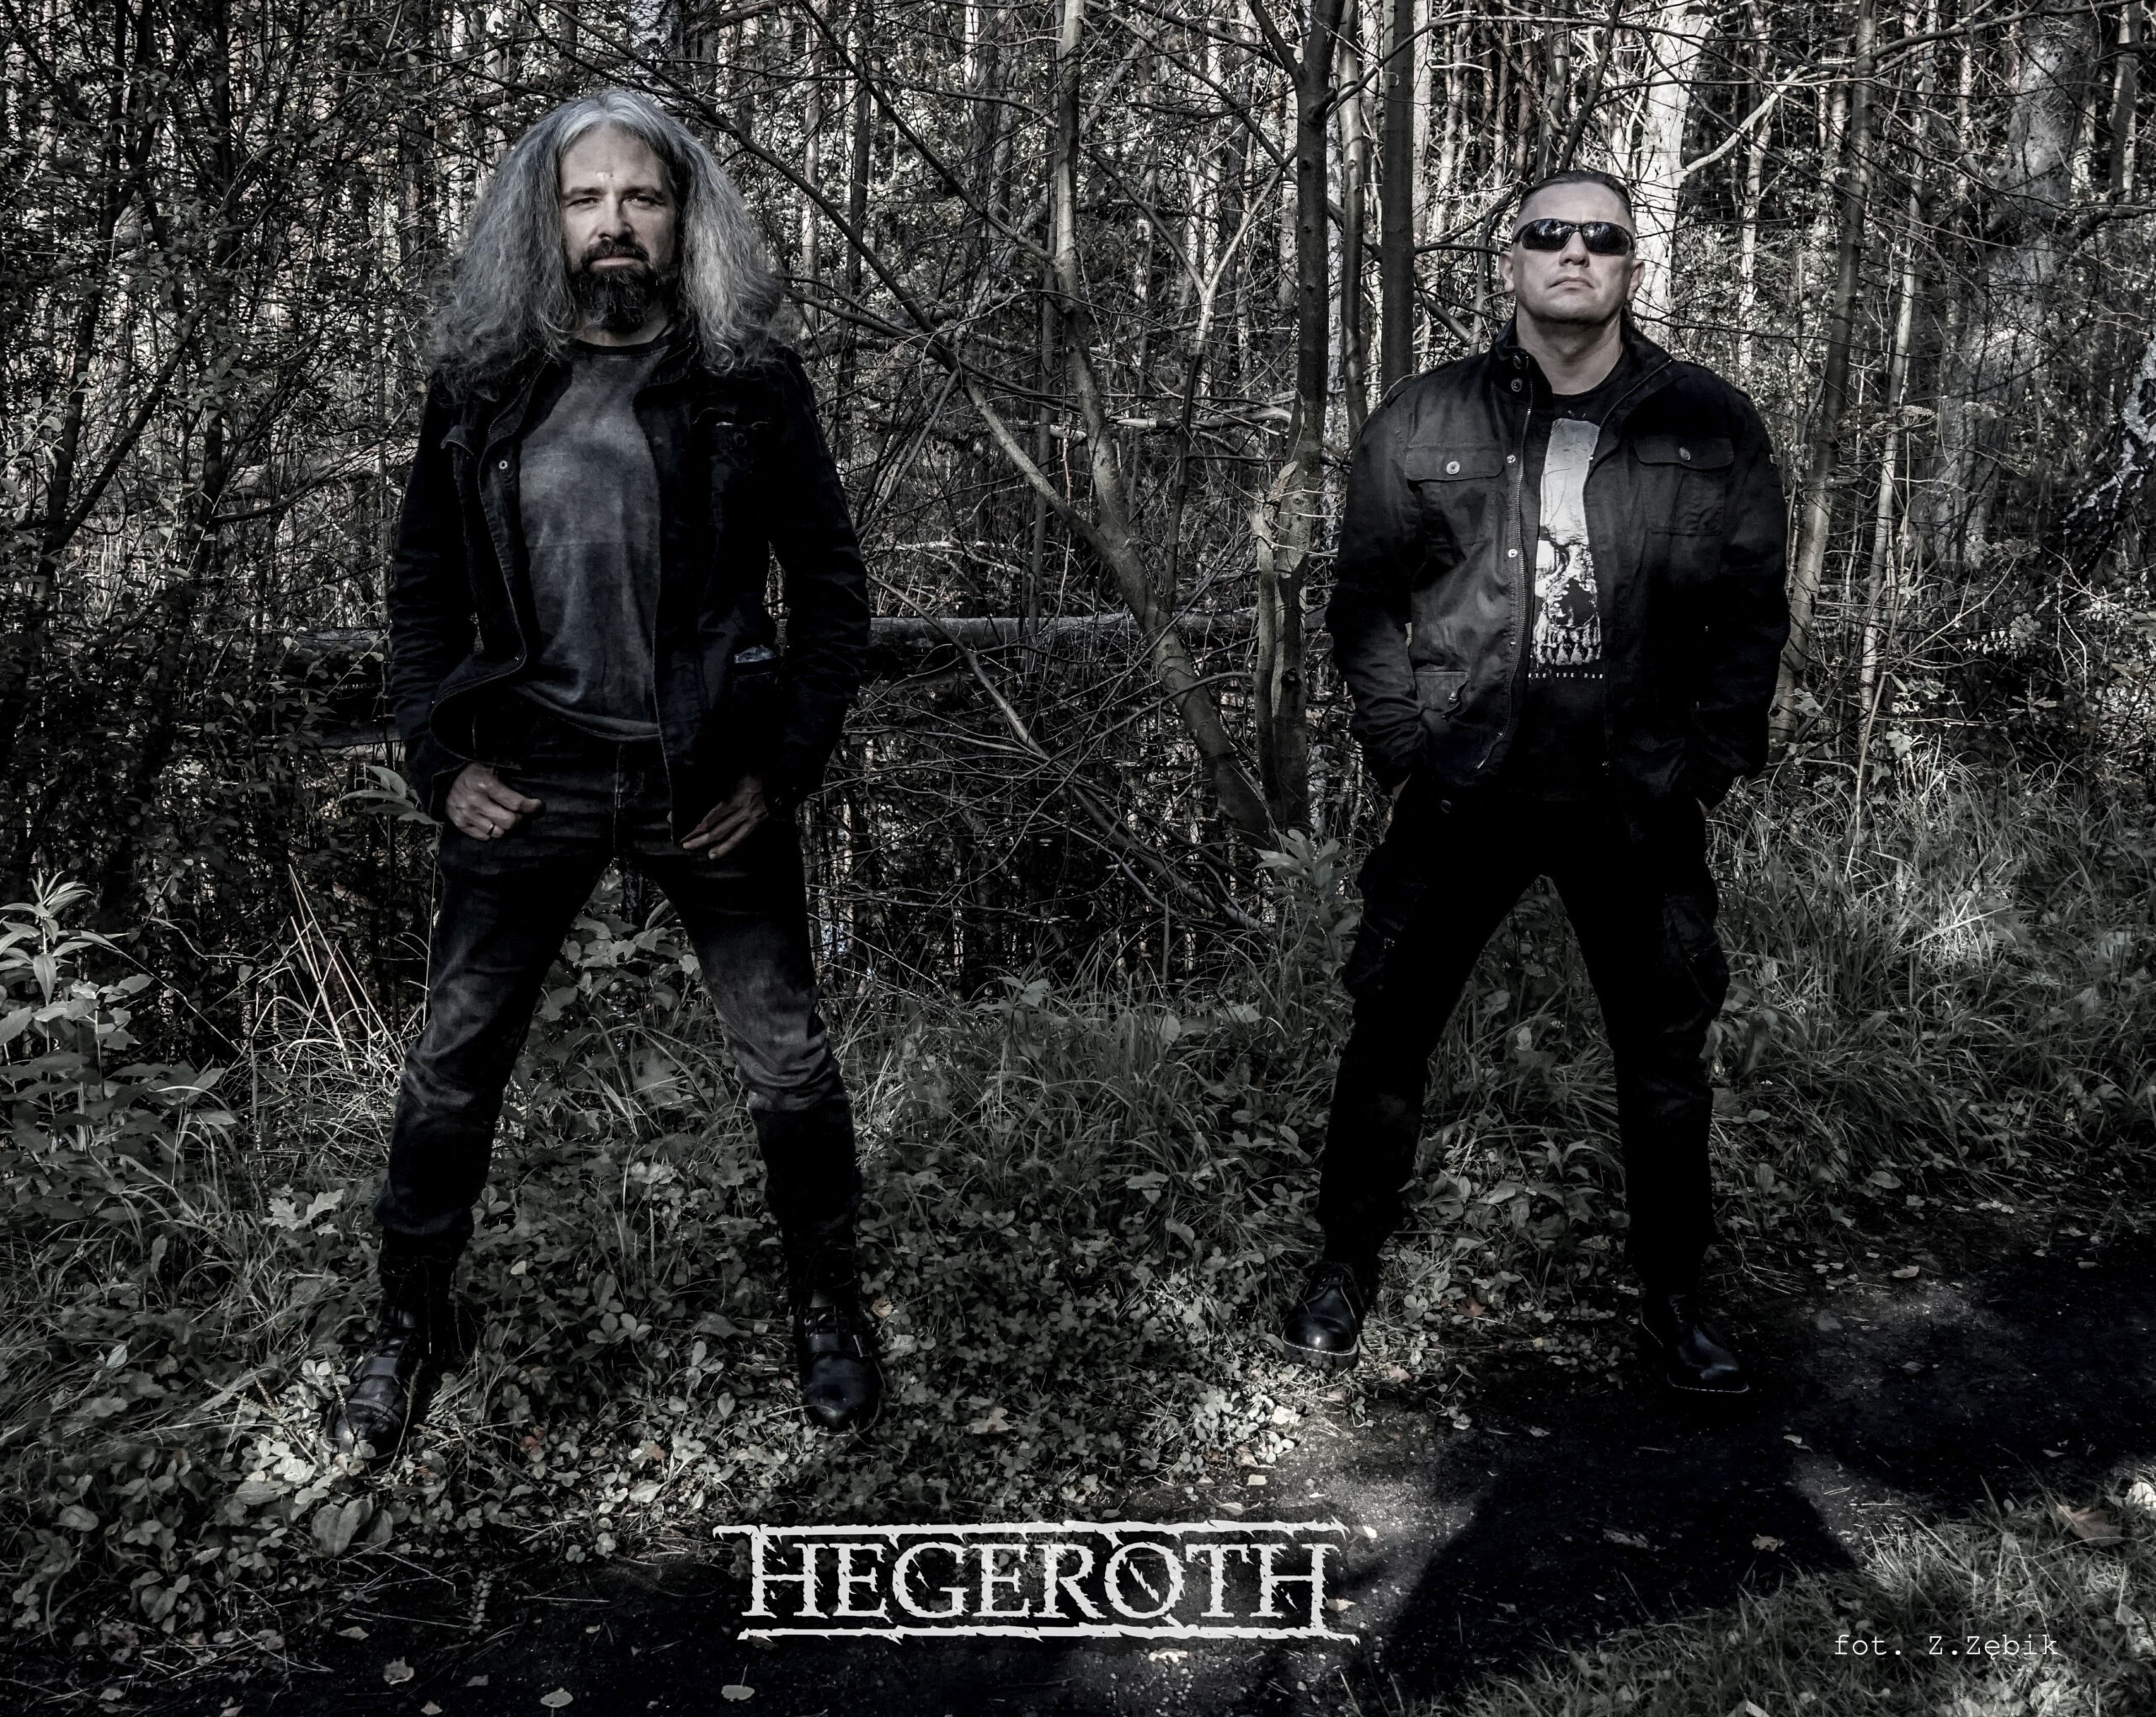 HEGEROTH release a new single for the song “Out Of Habit”, taken from their upcoming album.